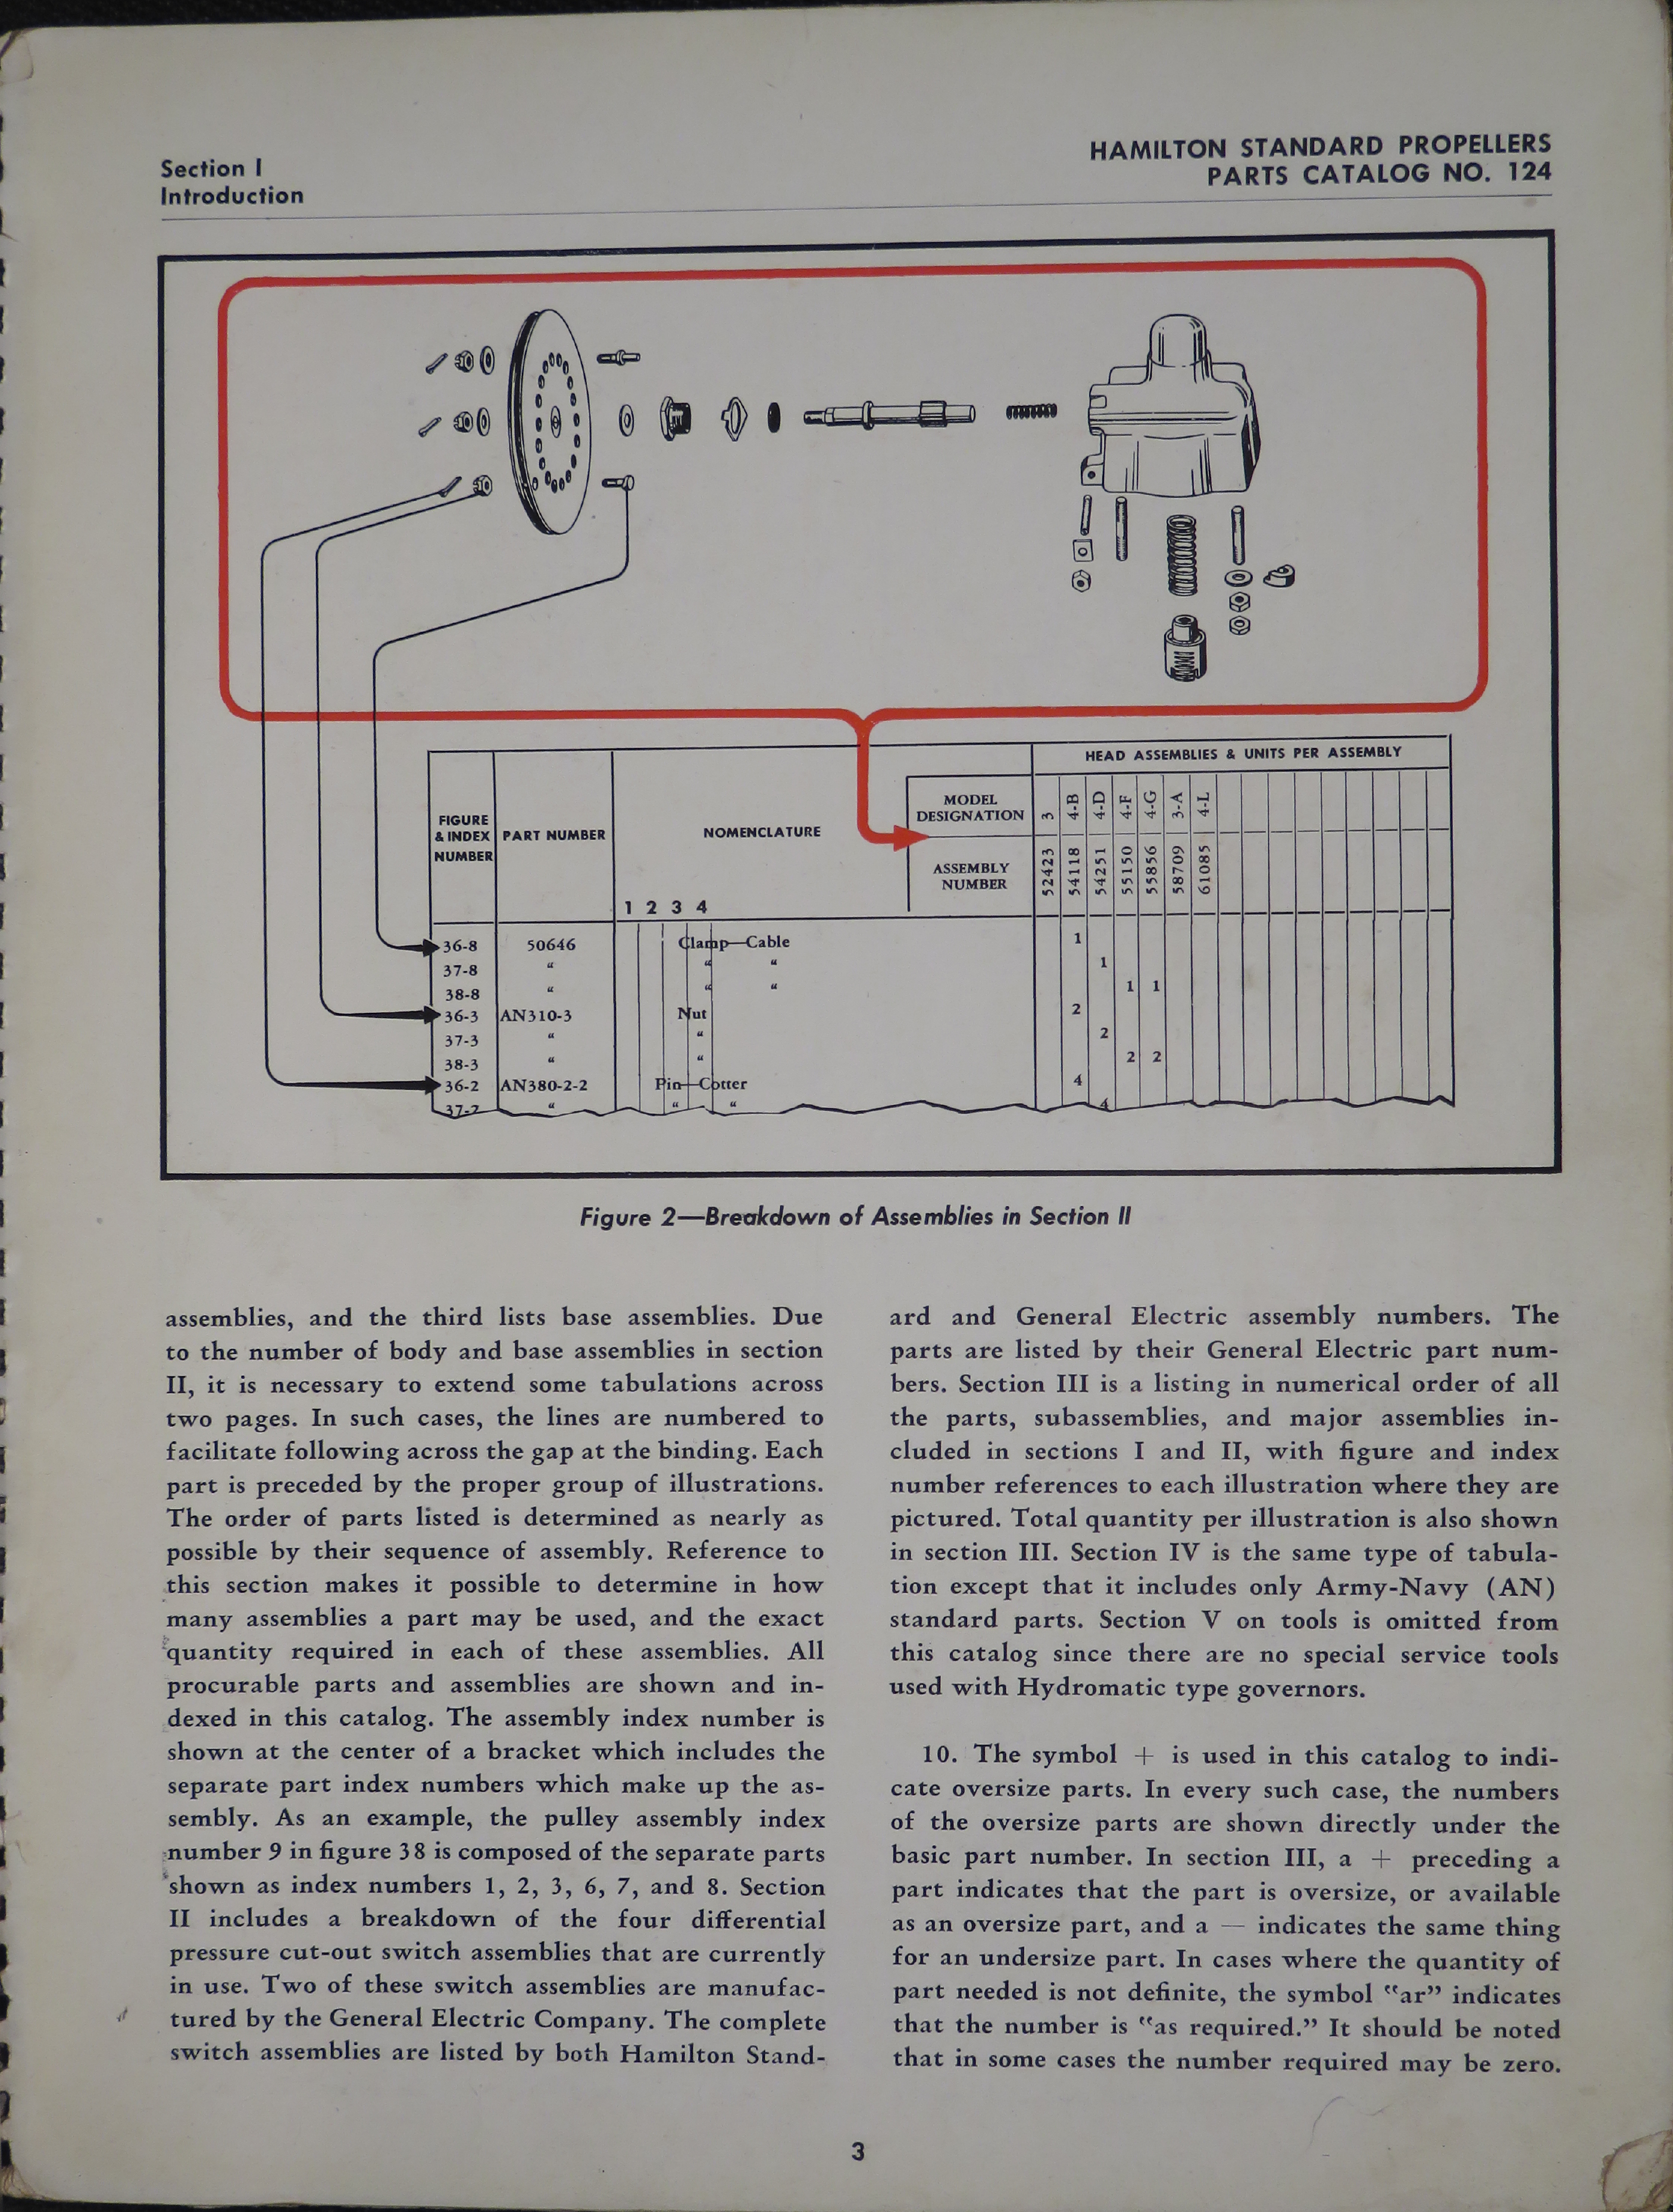 Sample page 7 from AirCorps Library document: Parts Catalog for Hydromatic Propeller Governors